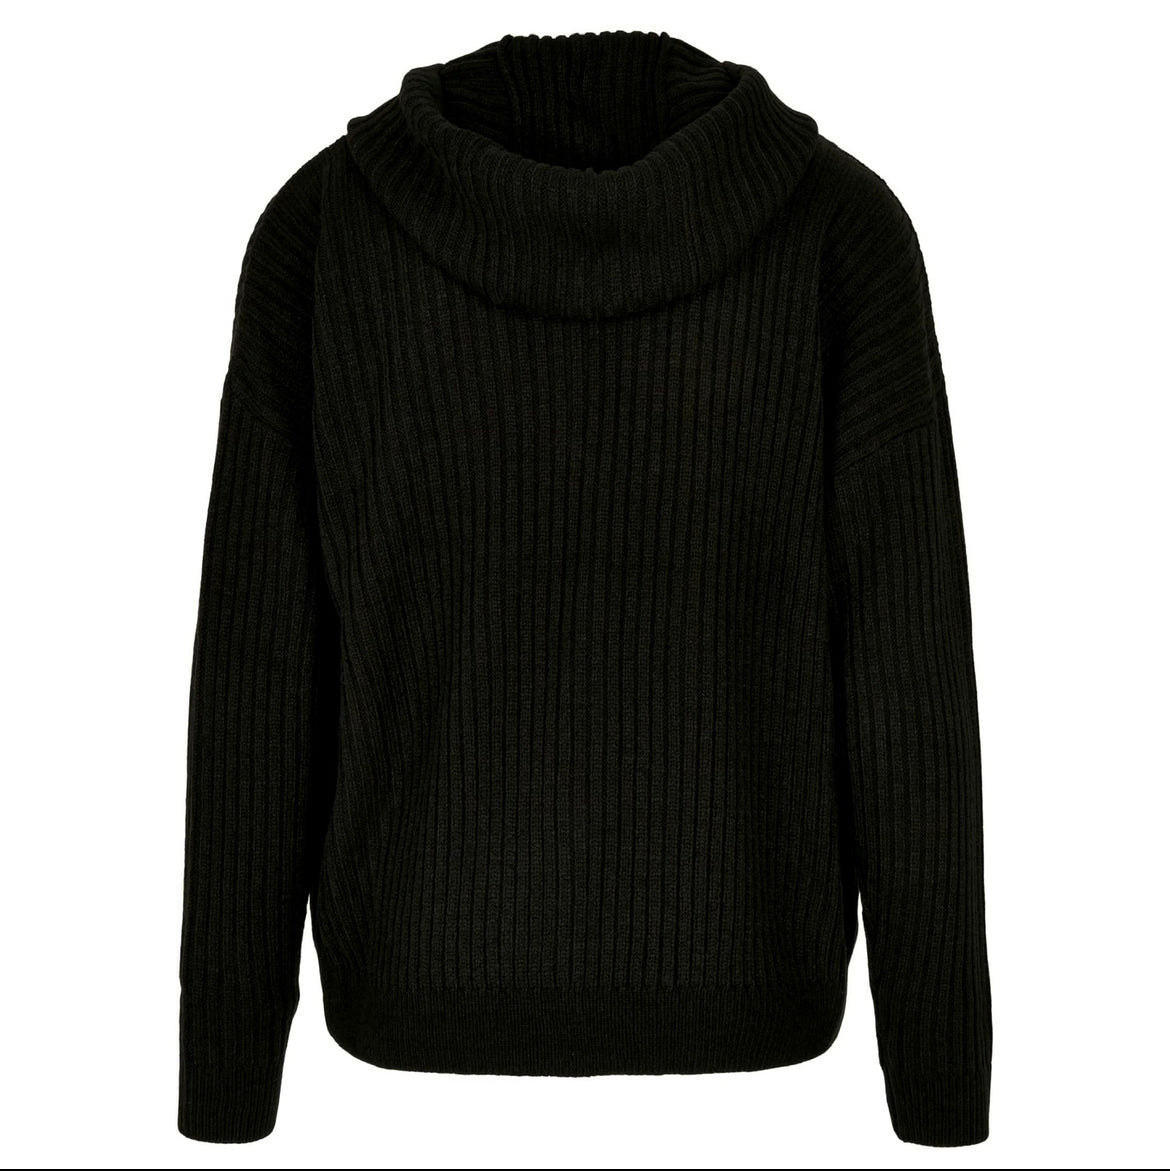 Knit Zip Up Sweater